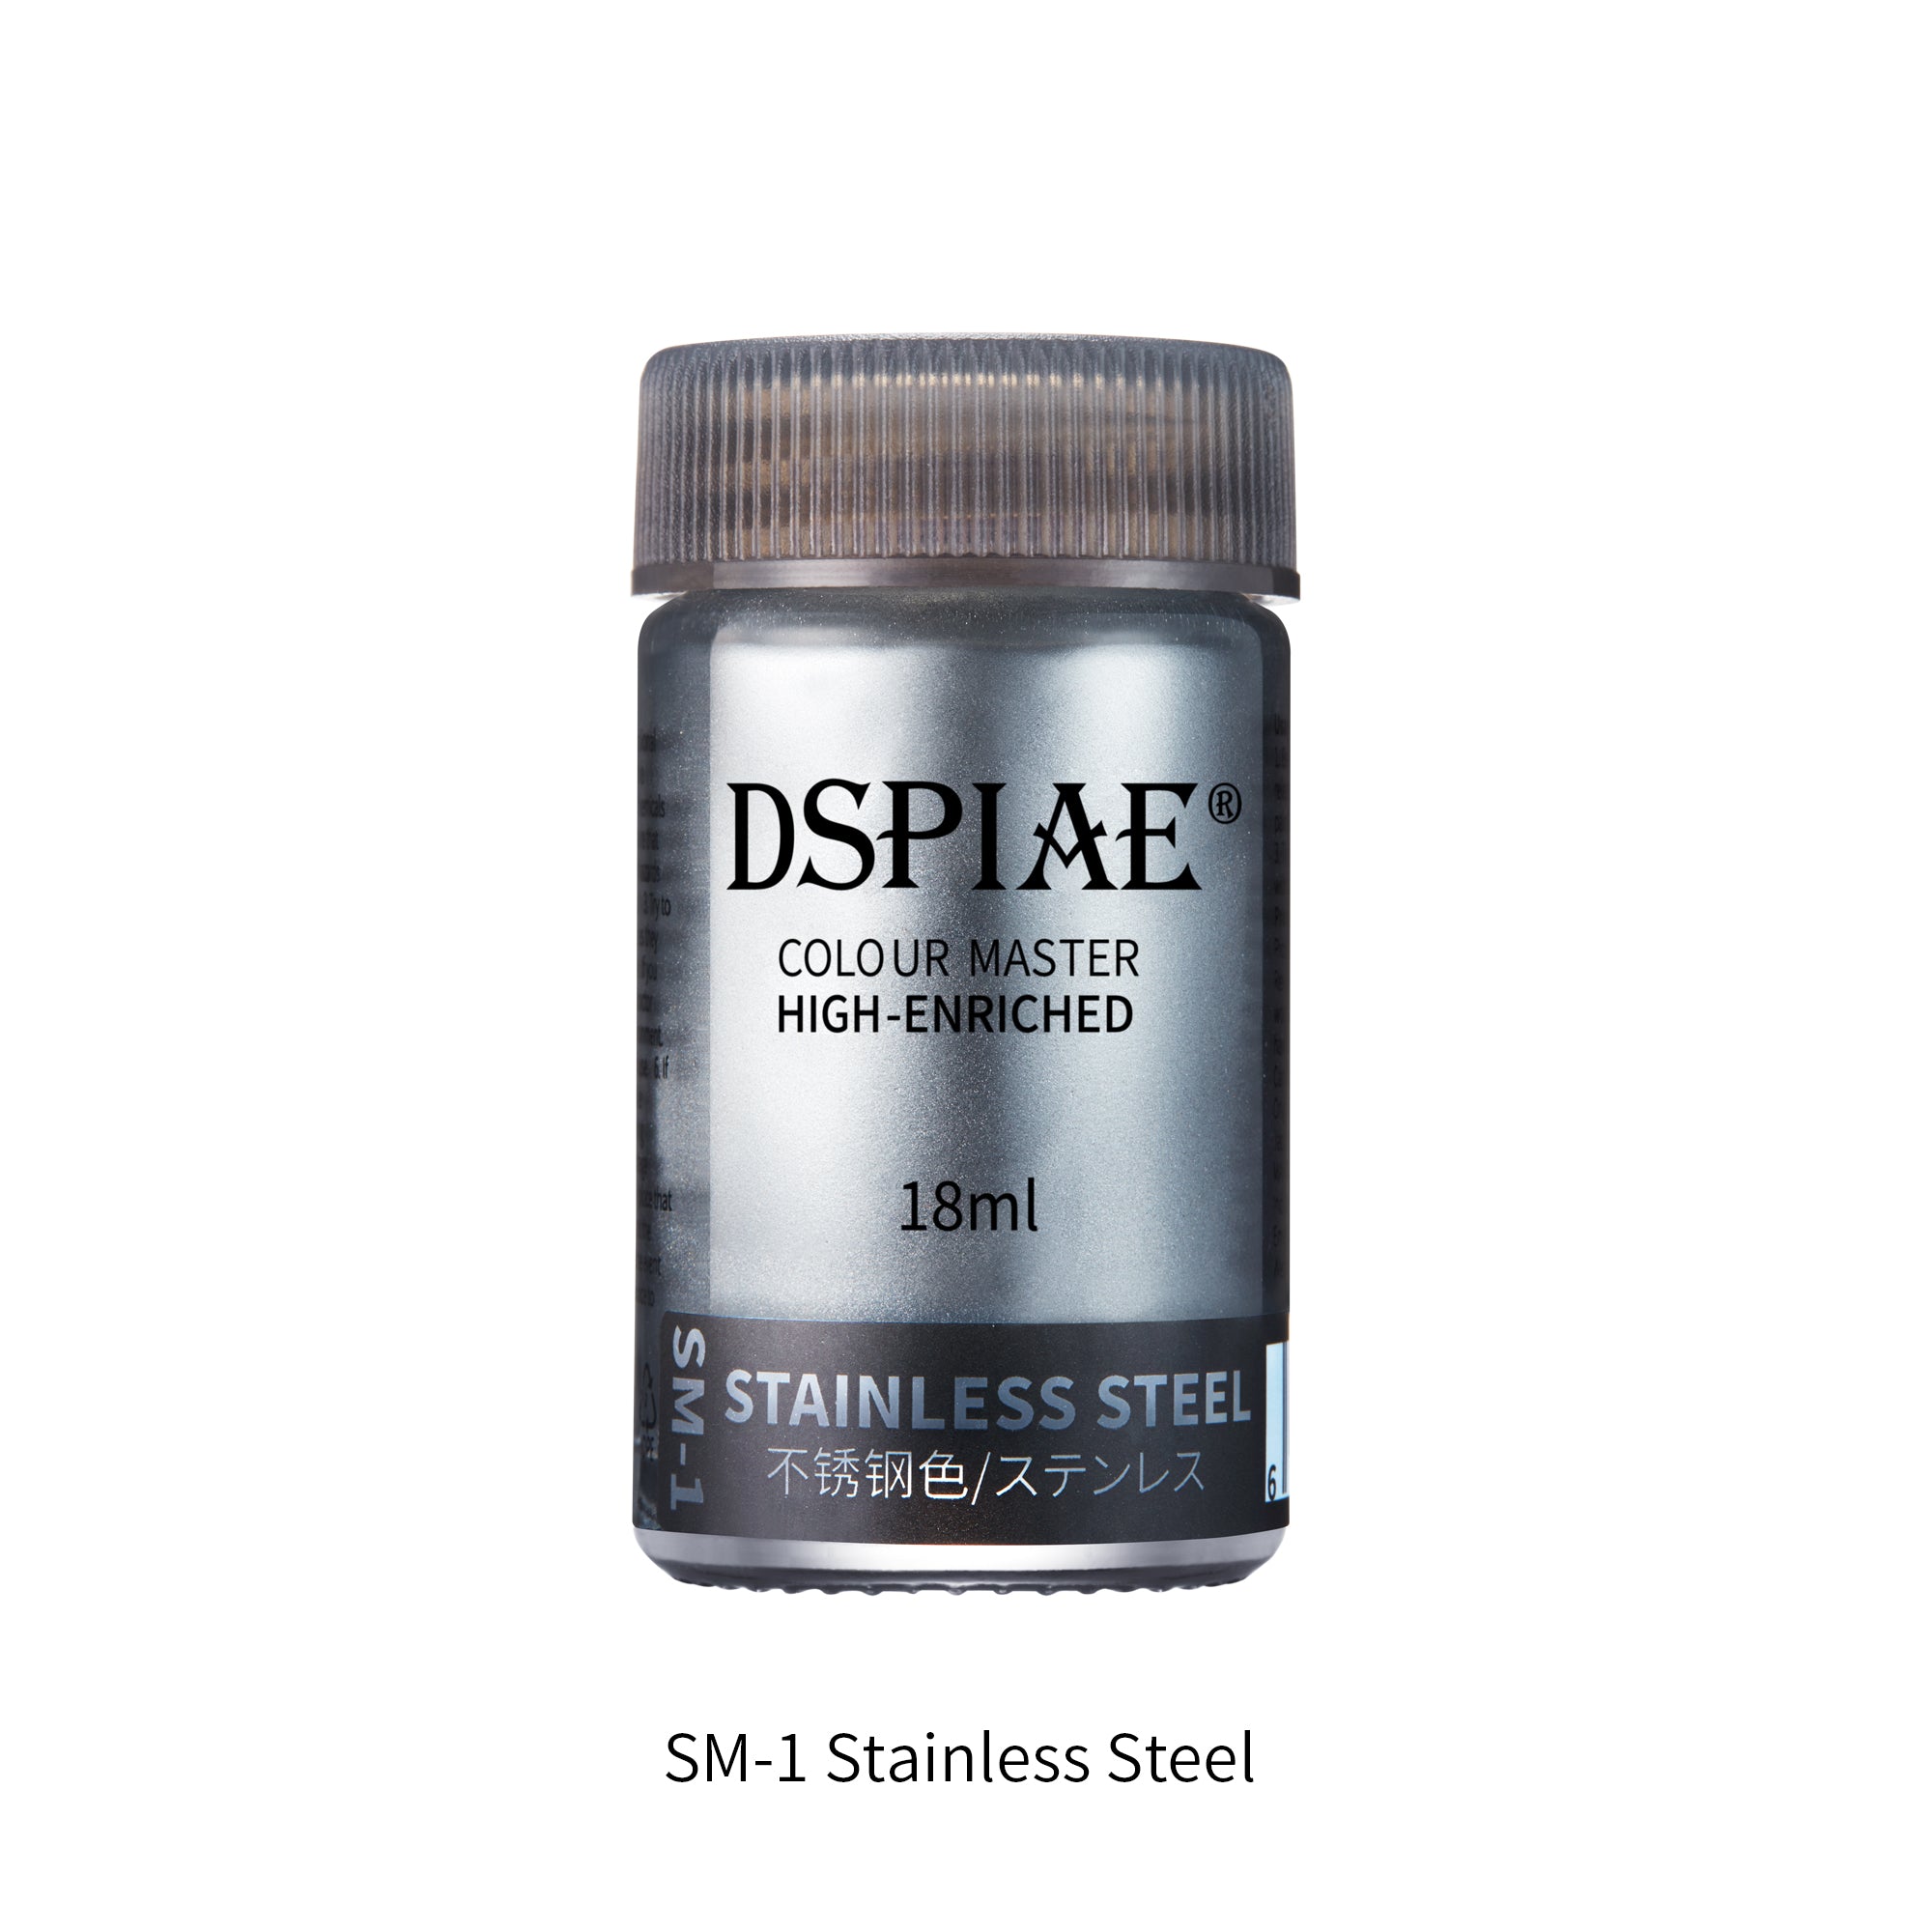 SM-1 Stainless Steel 18ml